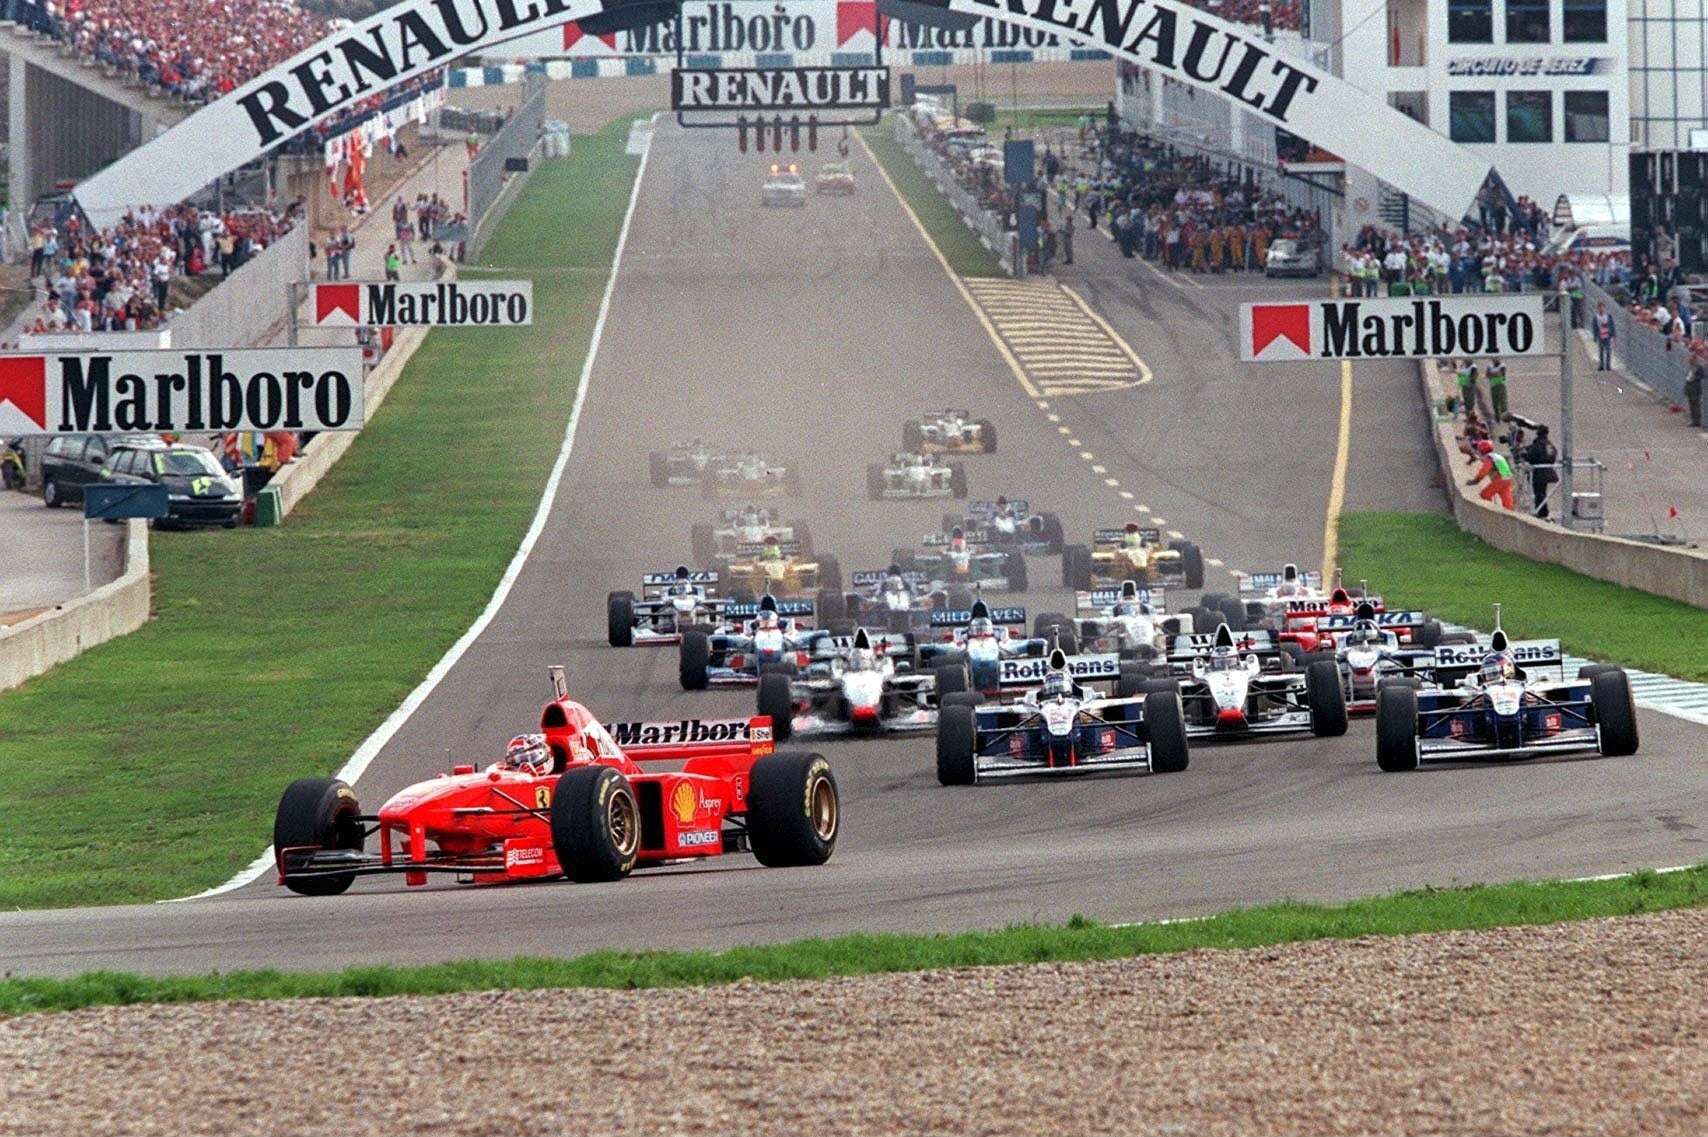 Ecclestone was making reference to Schumacher's tactics against Jacques Villeneuve in 1997